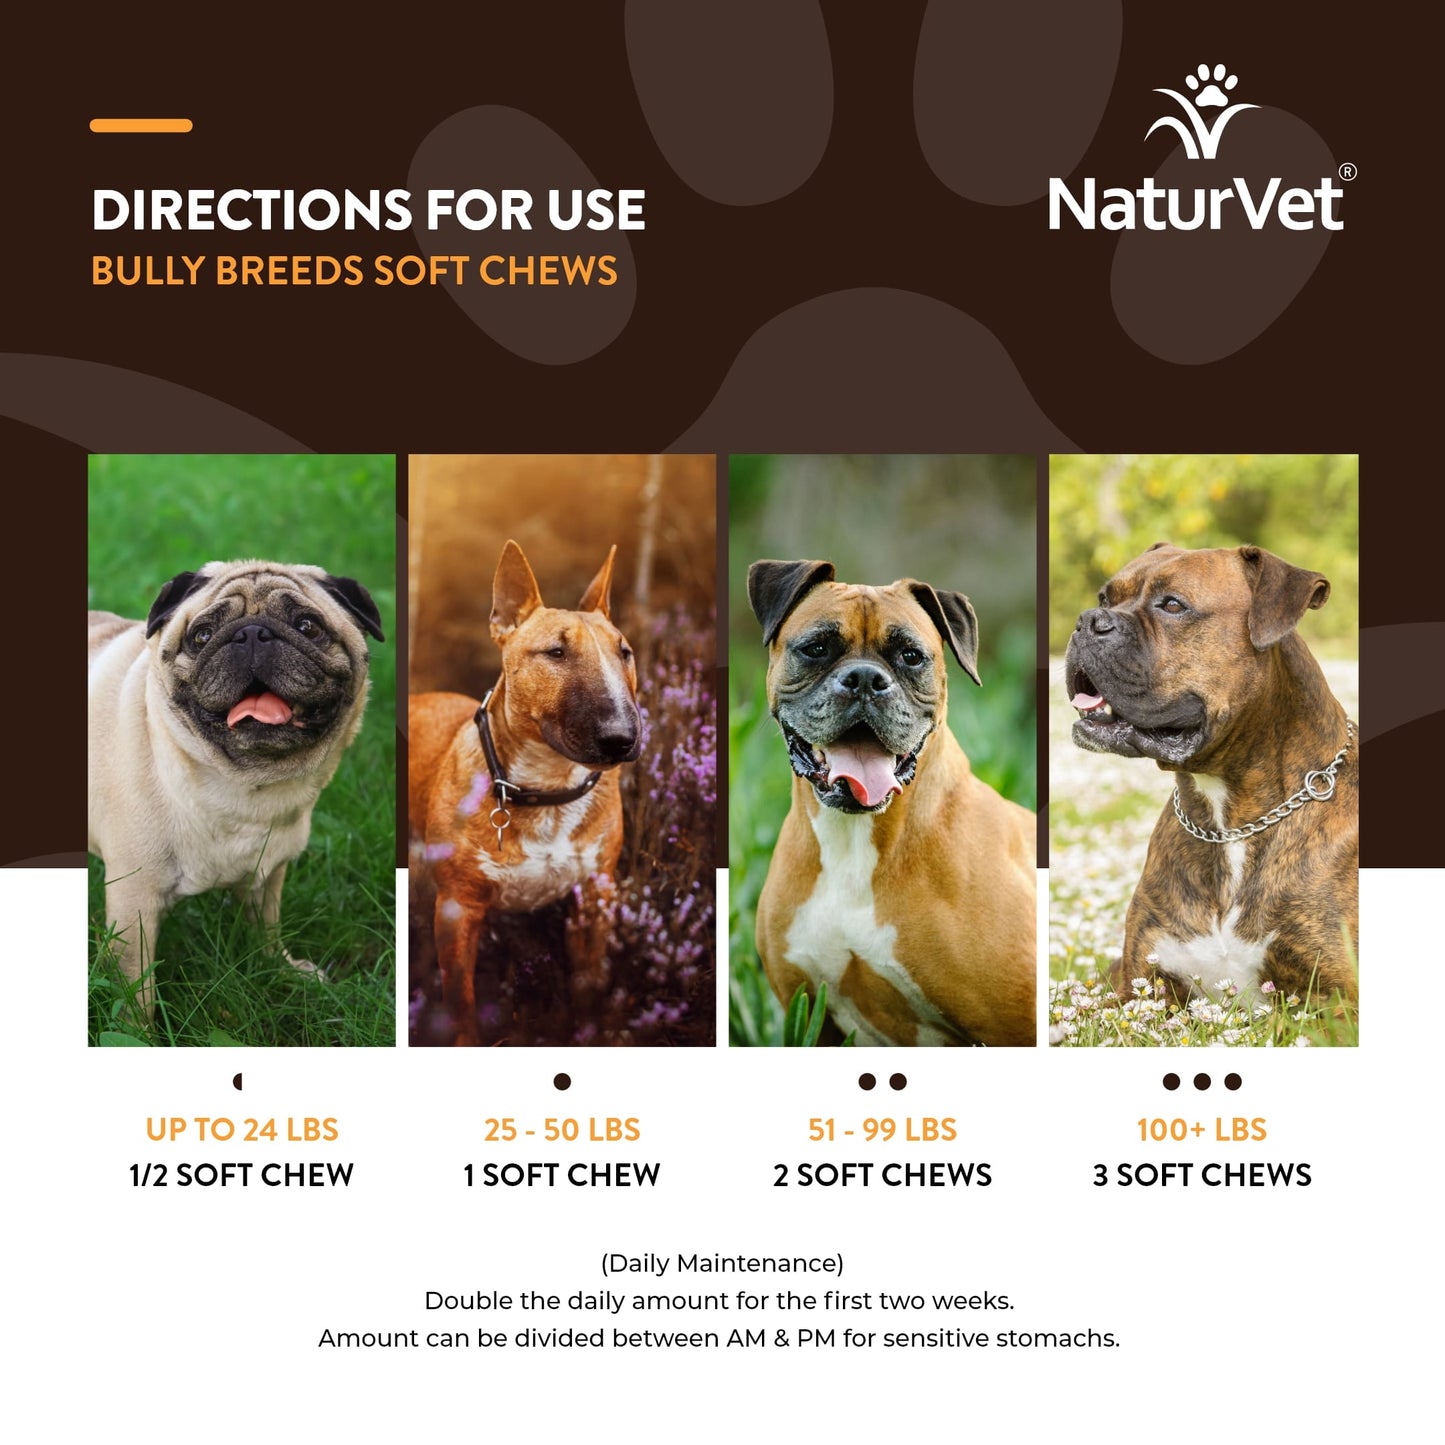 NaturVet Breed Specific Bully Breed Dogs